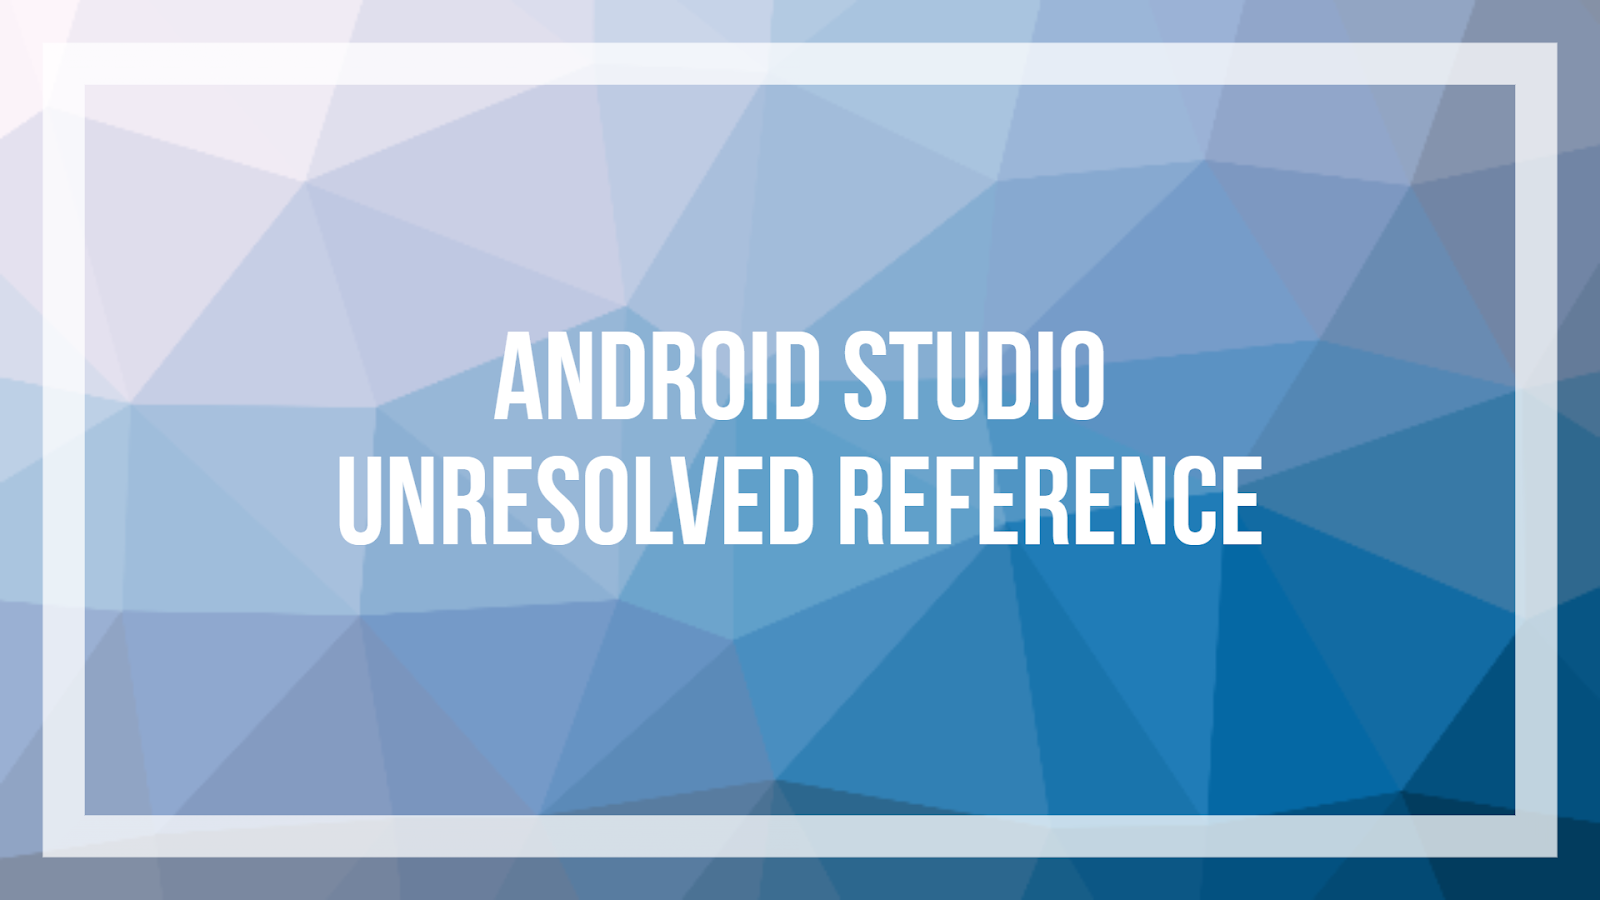 Android Studio Unresolved reference